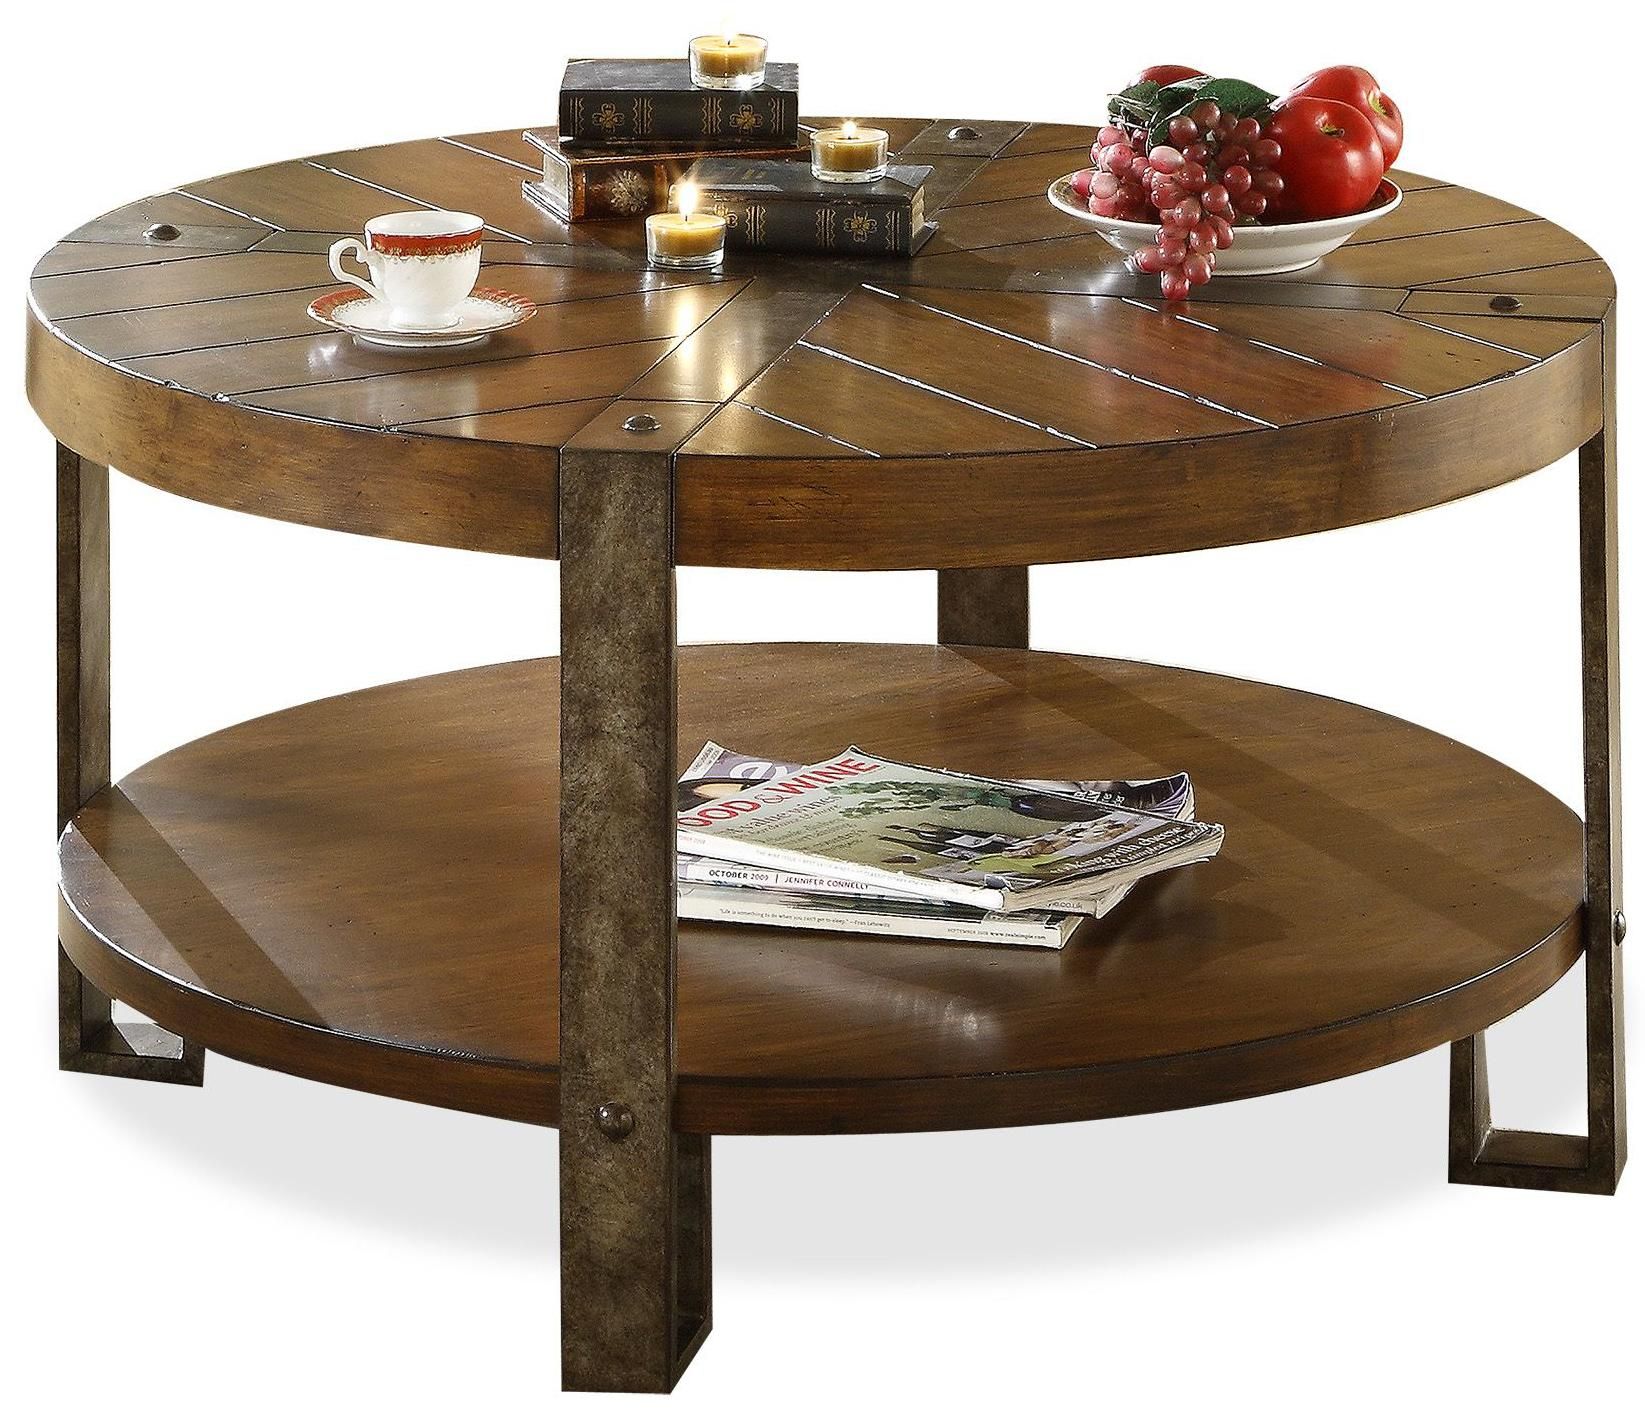 Awesome Round Coffee Tables With Storage | Homesfeed Inside Coffee Tables With Round Wooden Tops (View 3 of 20)